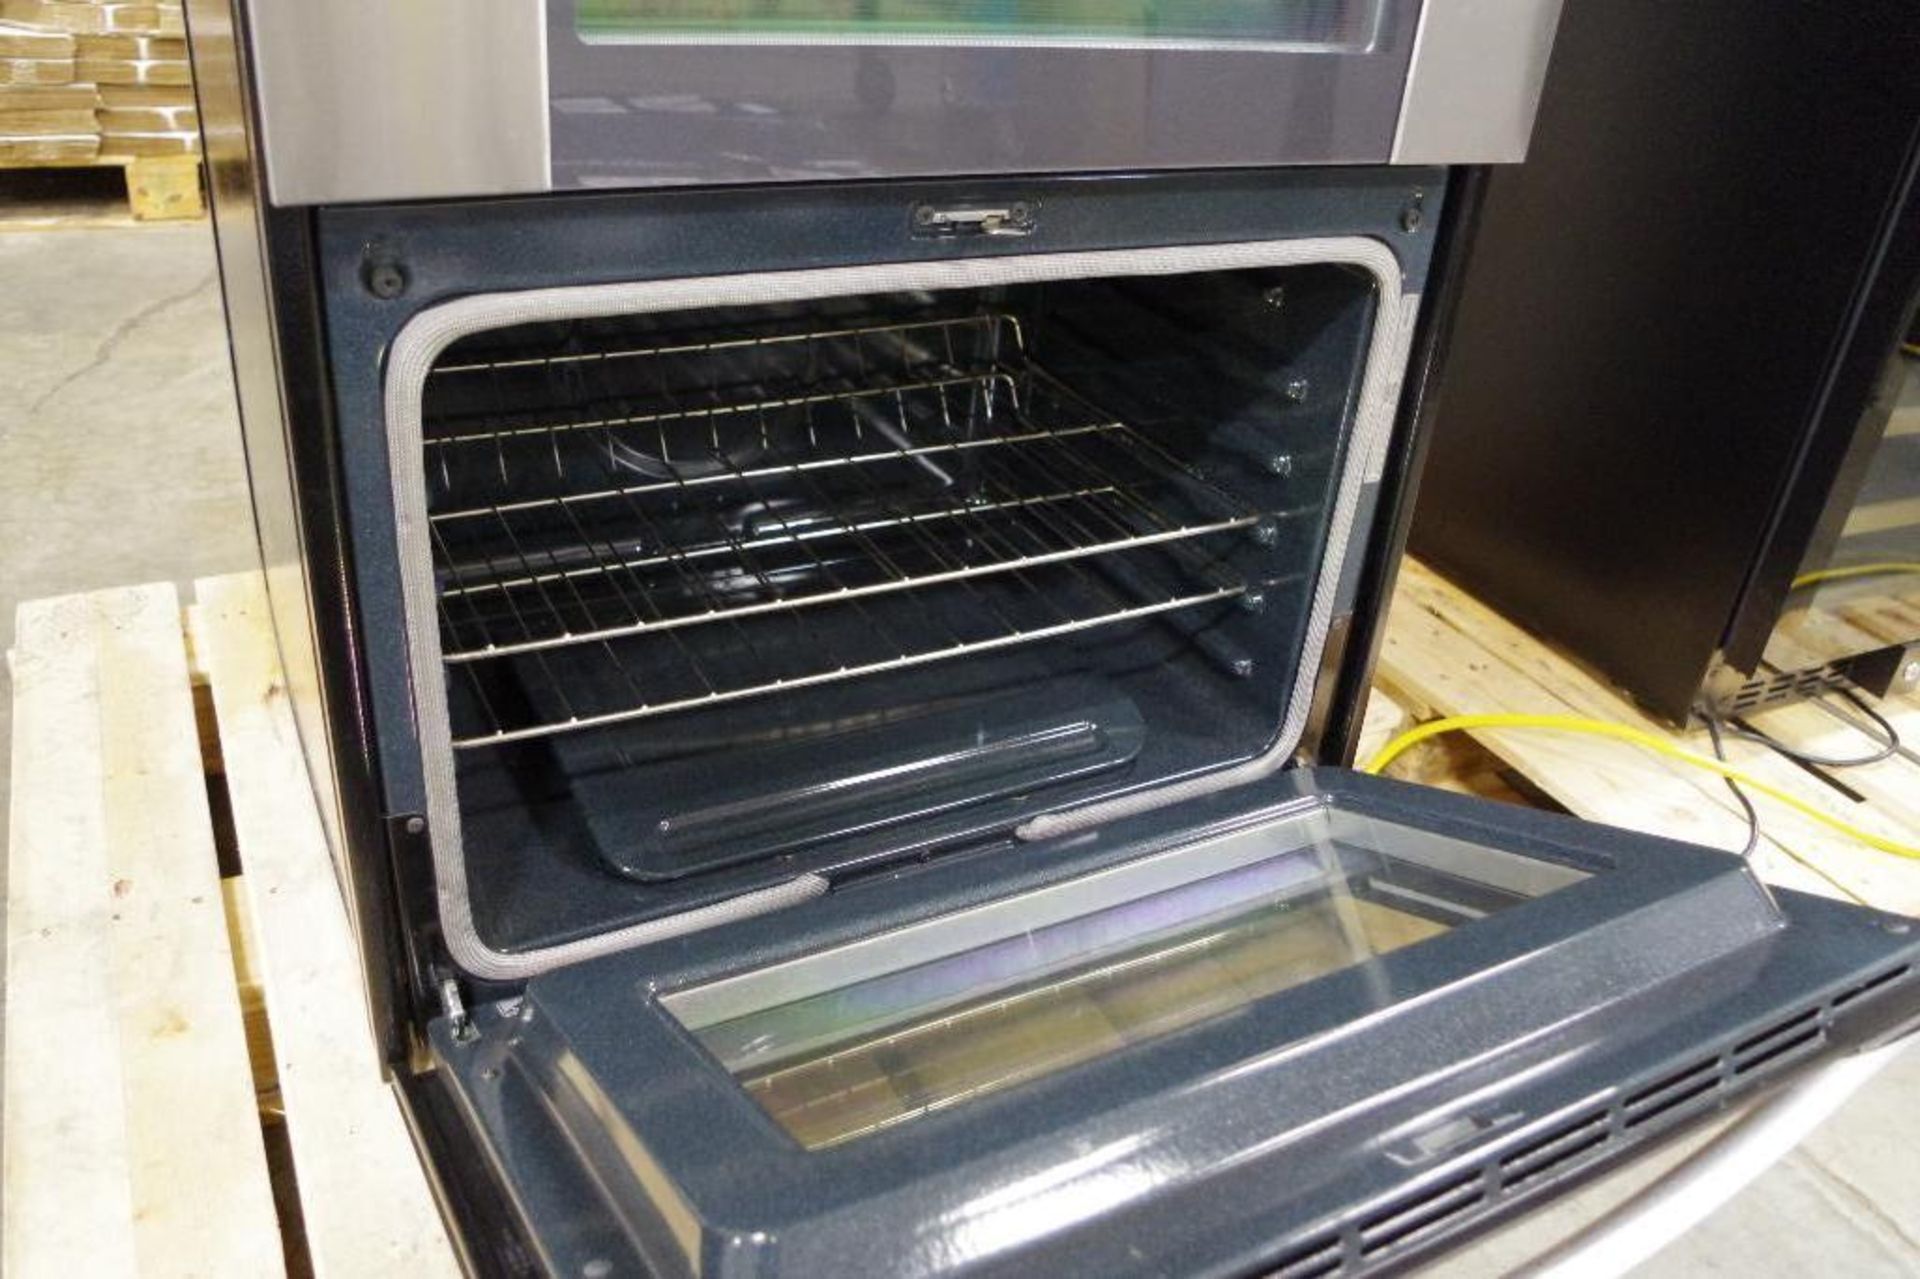 WHIRLPOOL 6.0 Total cu. Ft. Double Oven Gas Range w/ AccuBake System M/N WGG555SOBS (Must Preview) - Image 7 of 8